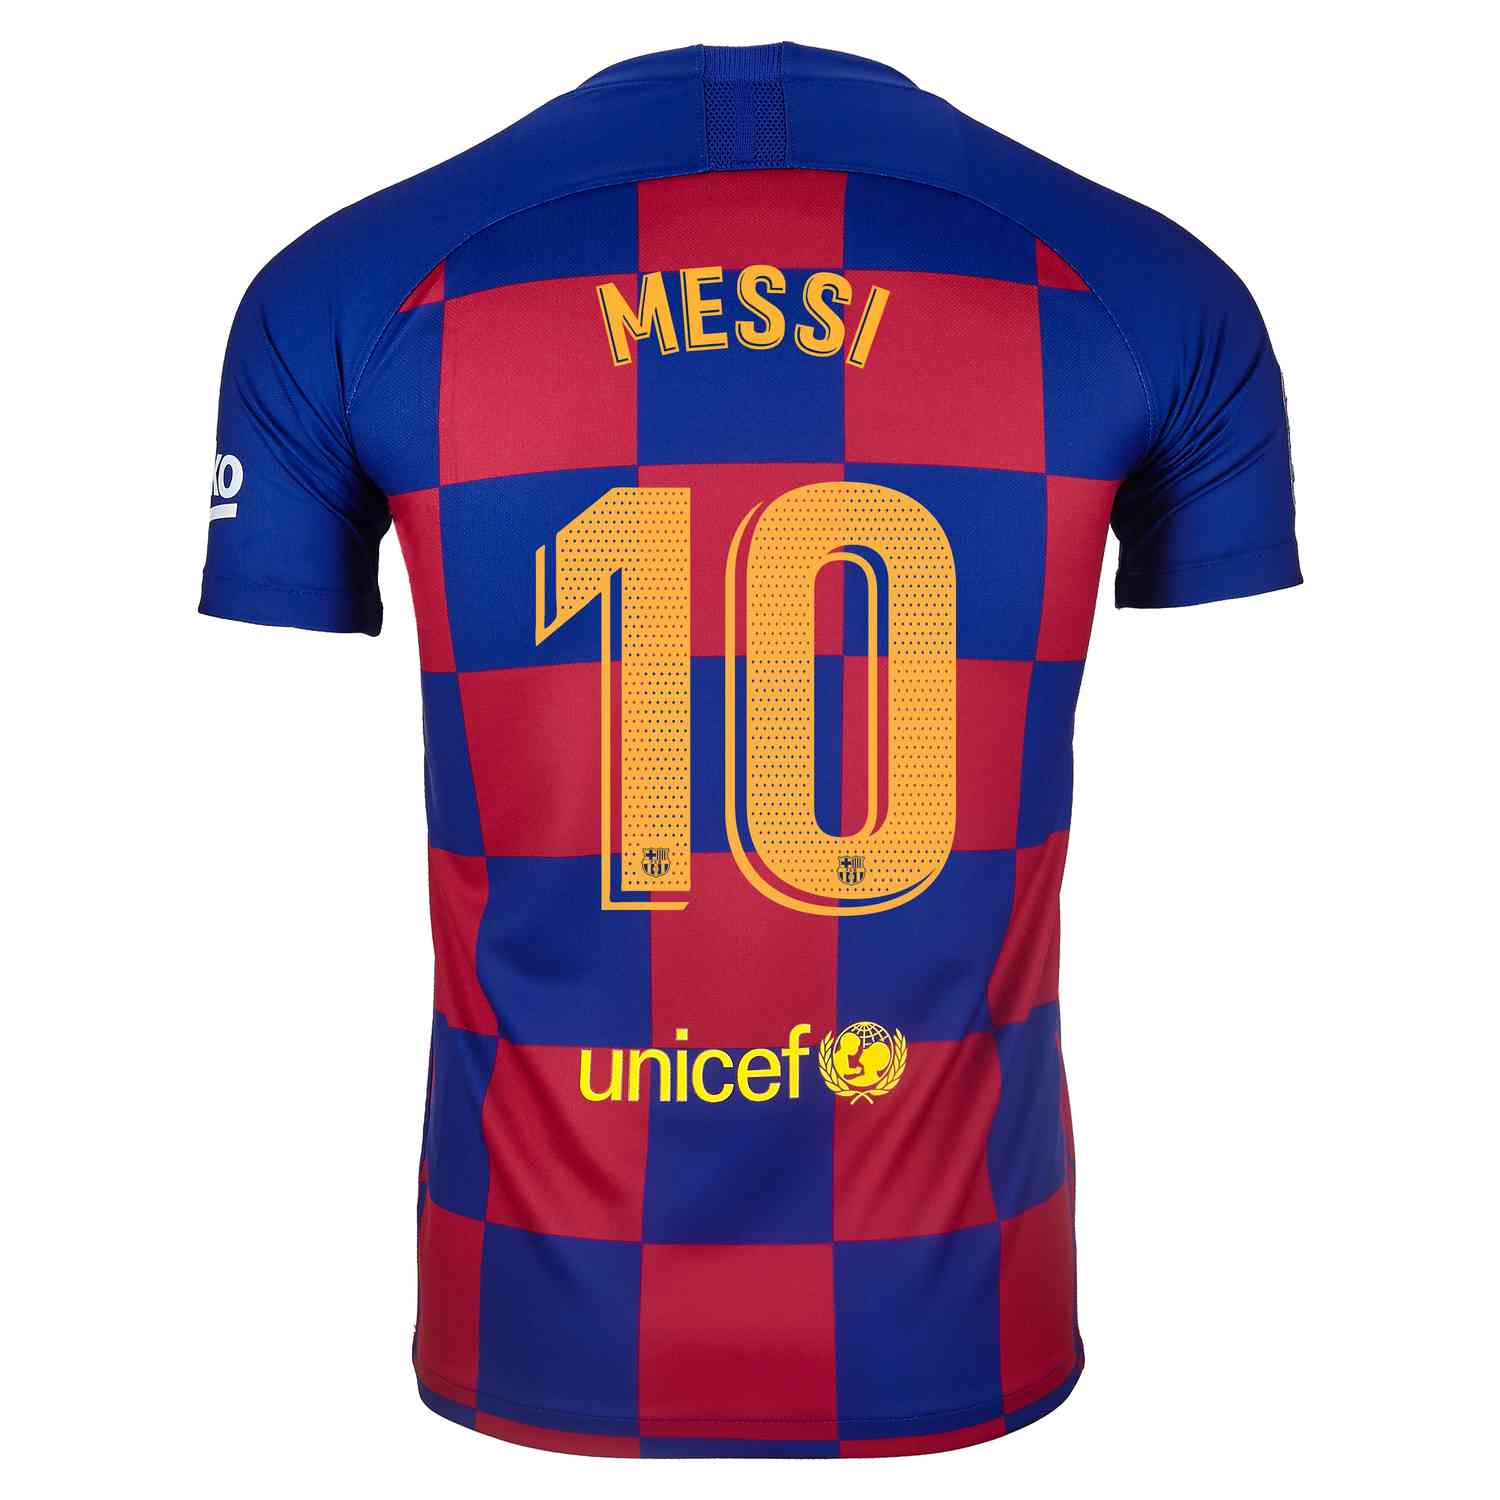 2019/20 Nike Lionel Messi Barcelona Home Jersey -